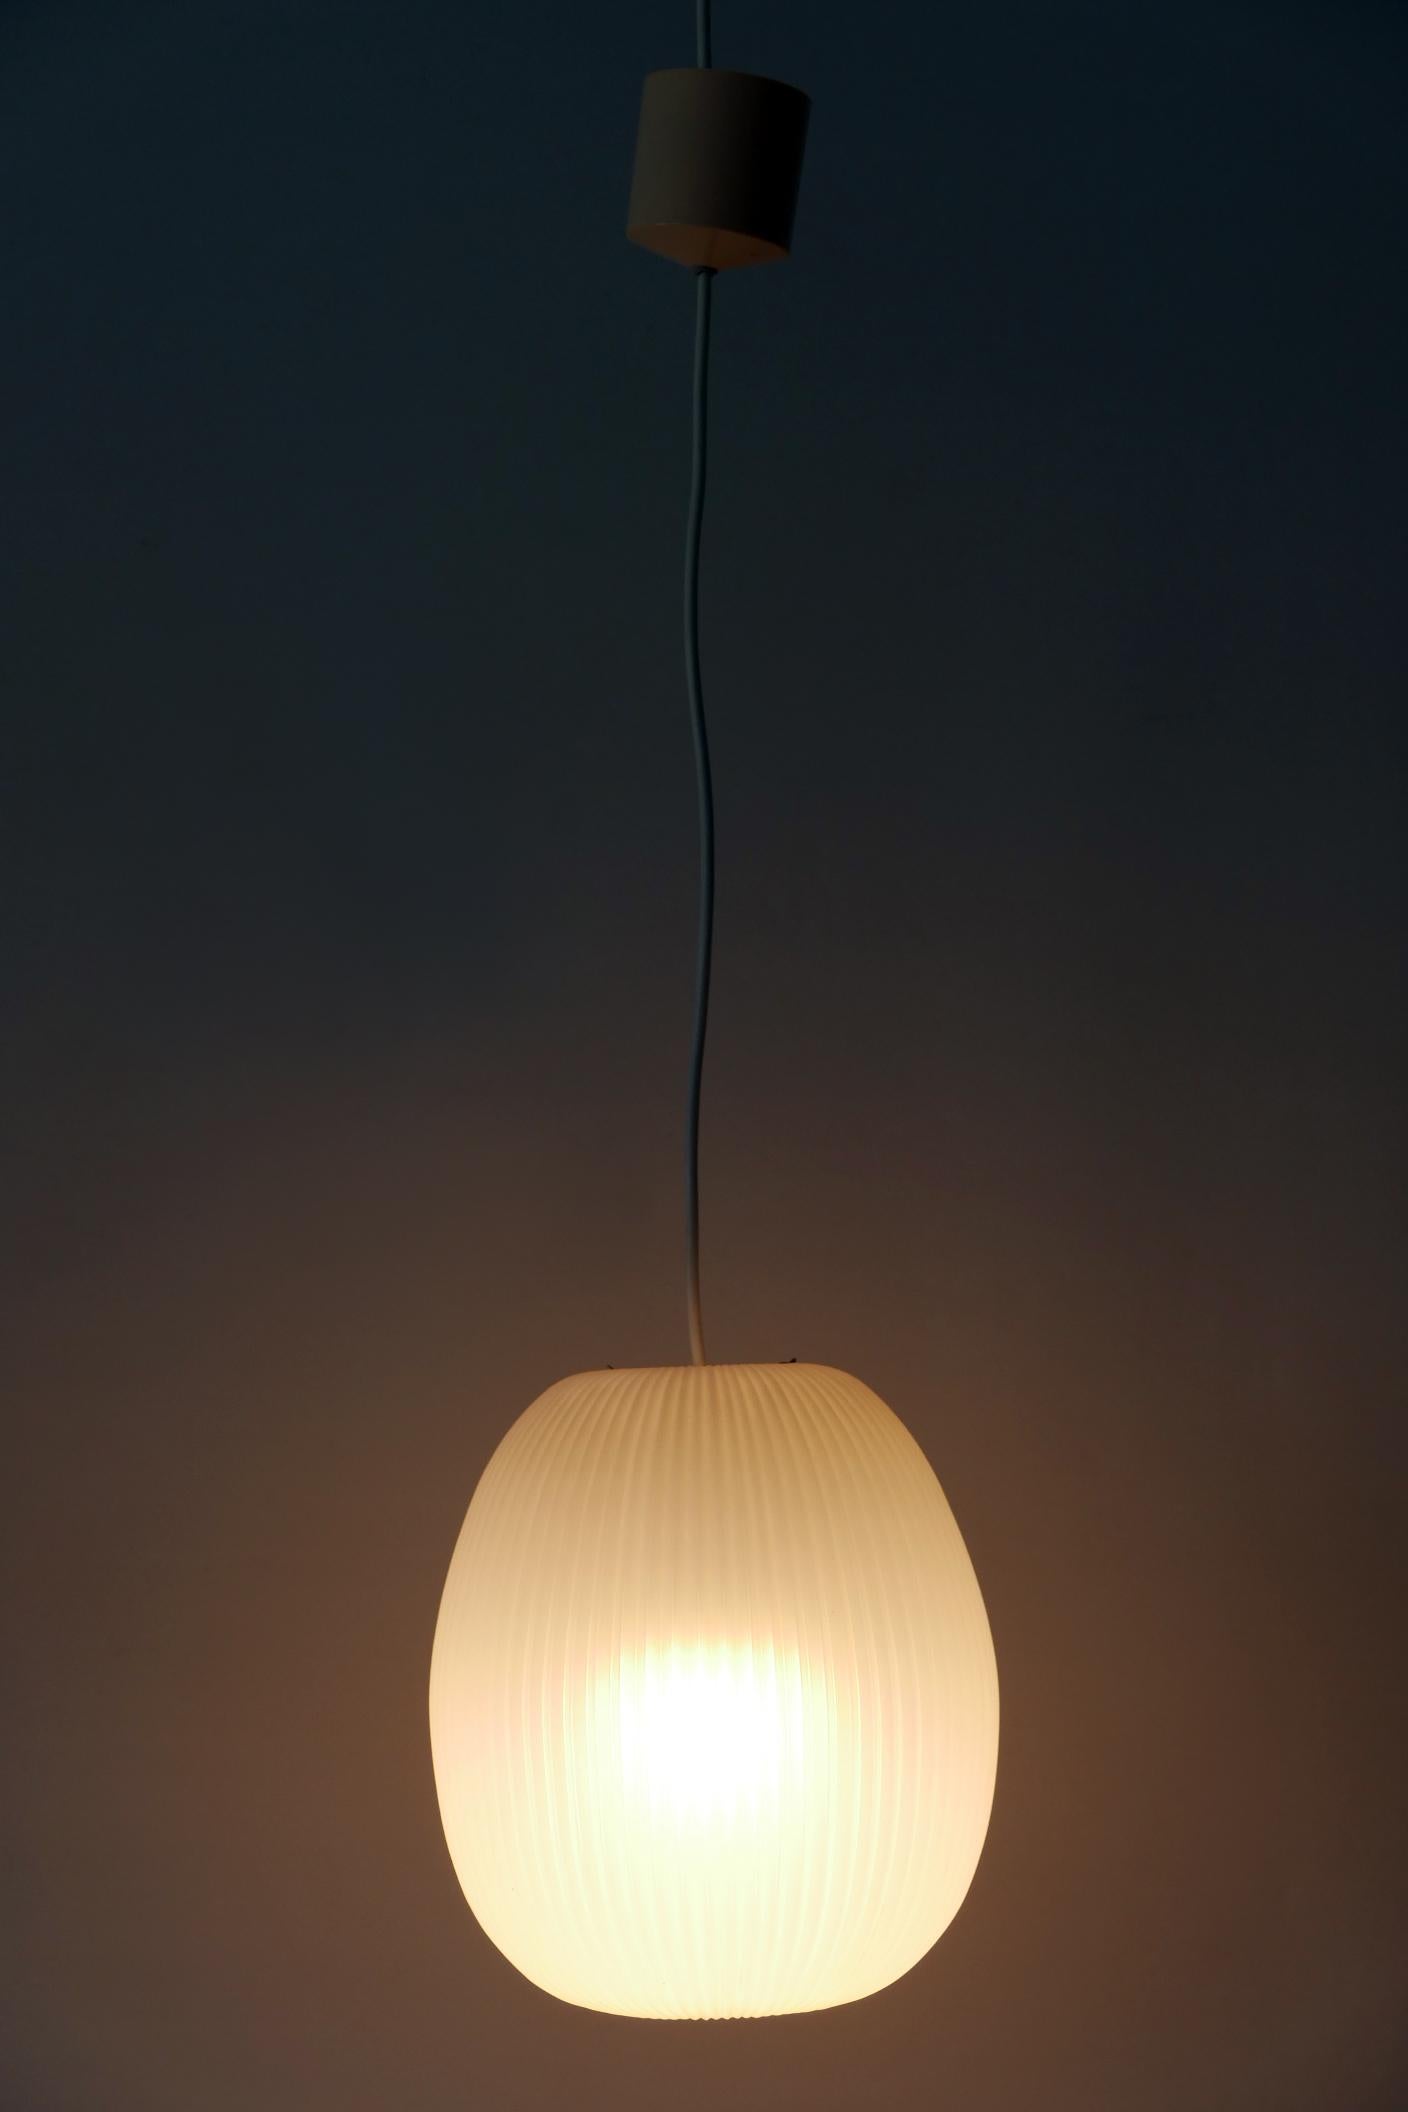 Mid-20th Century Lovely Mid-Century Modern Pendant Lamp by Aloys F. Gangkofner für Erco 1960s For Sale